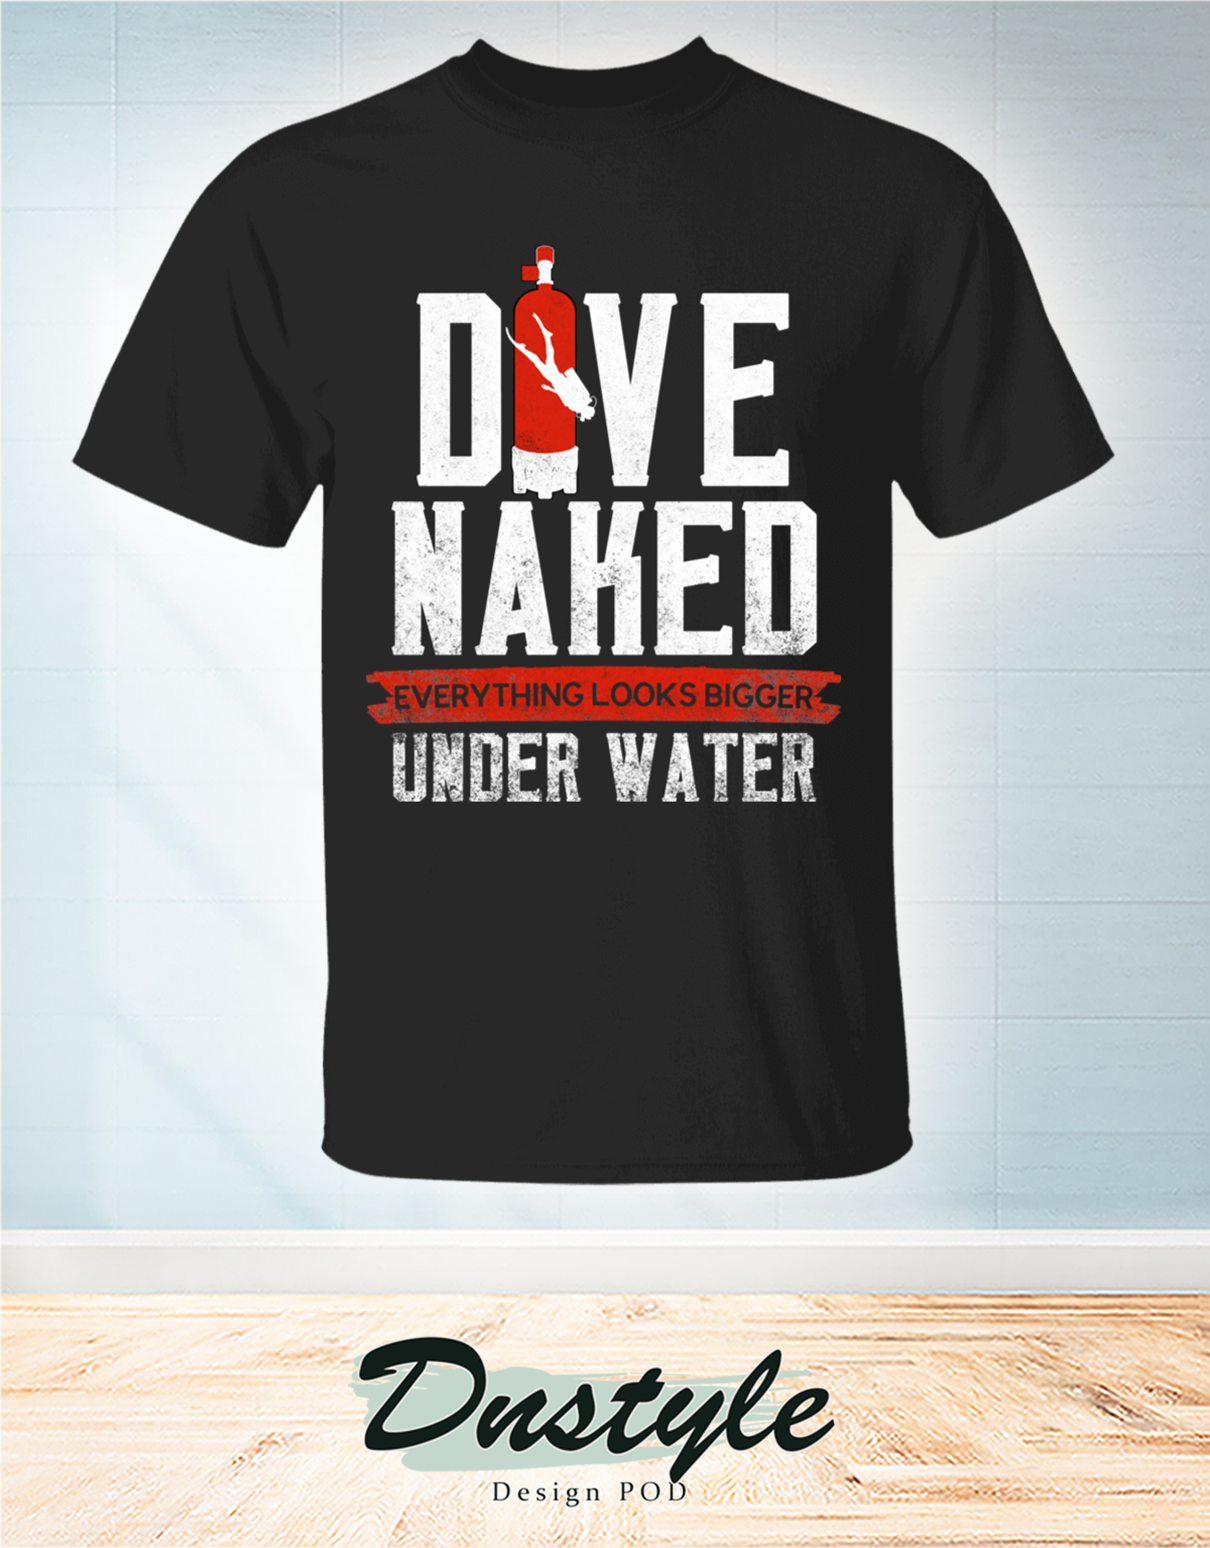 Dive naked everything look bigger under water t-shirt 1